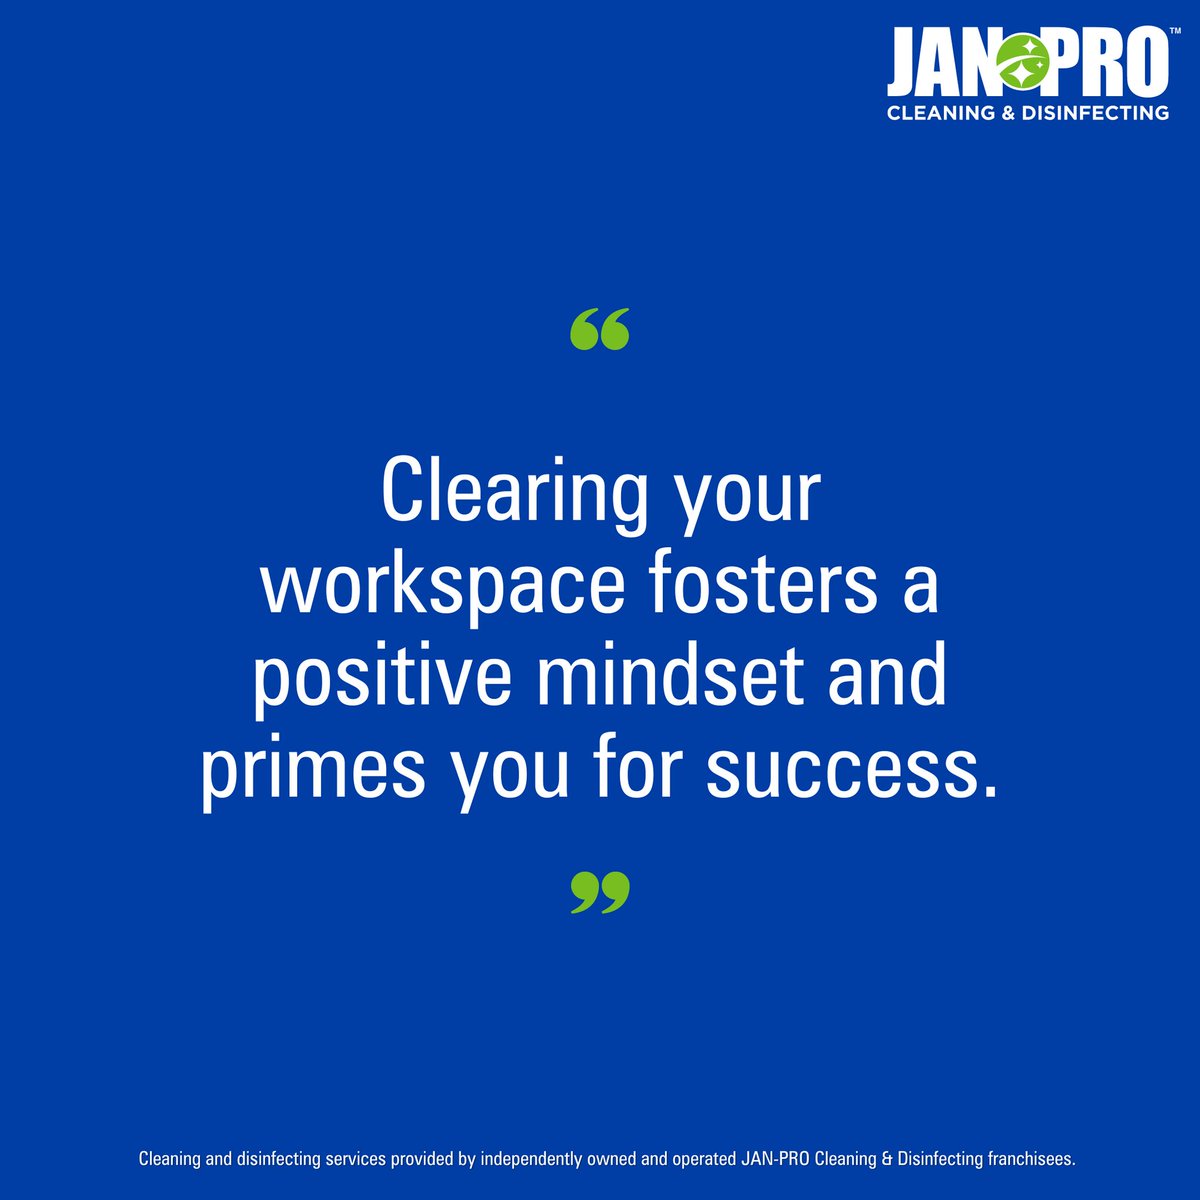 Happy Thursday!

Start your day with positive thoughts and a clean and organize space!

#commercialcleaning #janitorialservices #businesscleaning #metrodetroit #detroitbusiness #janpro #janproinDetroit #business #EnviroShield #GreenCleaning #HappyThursday